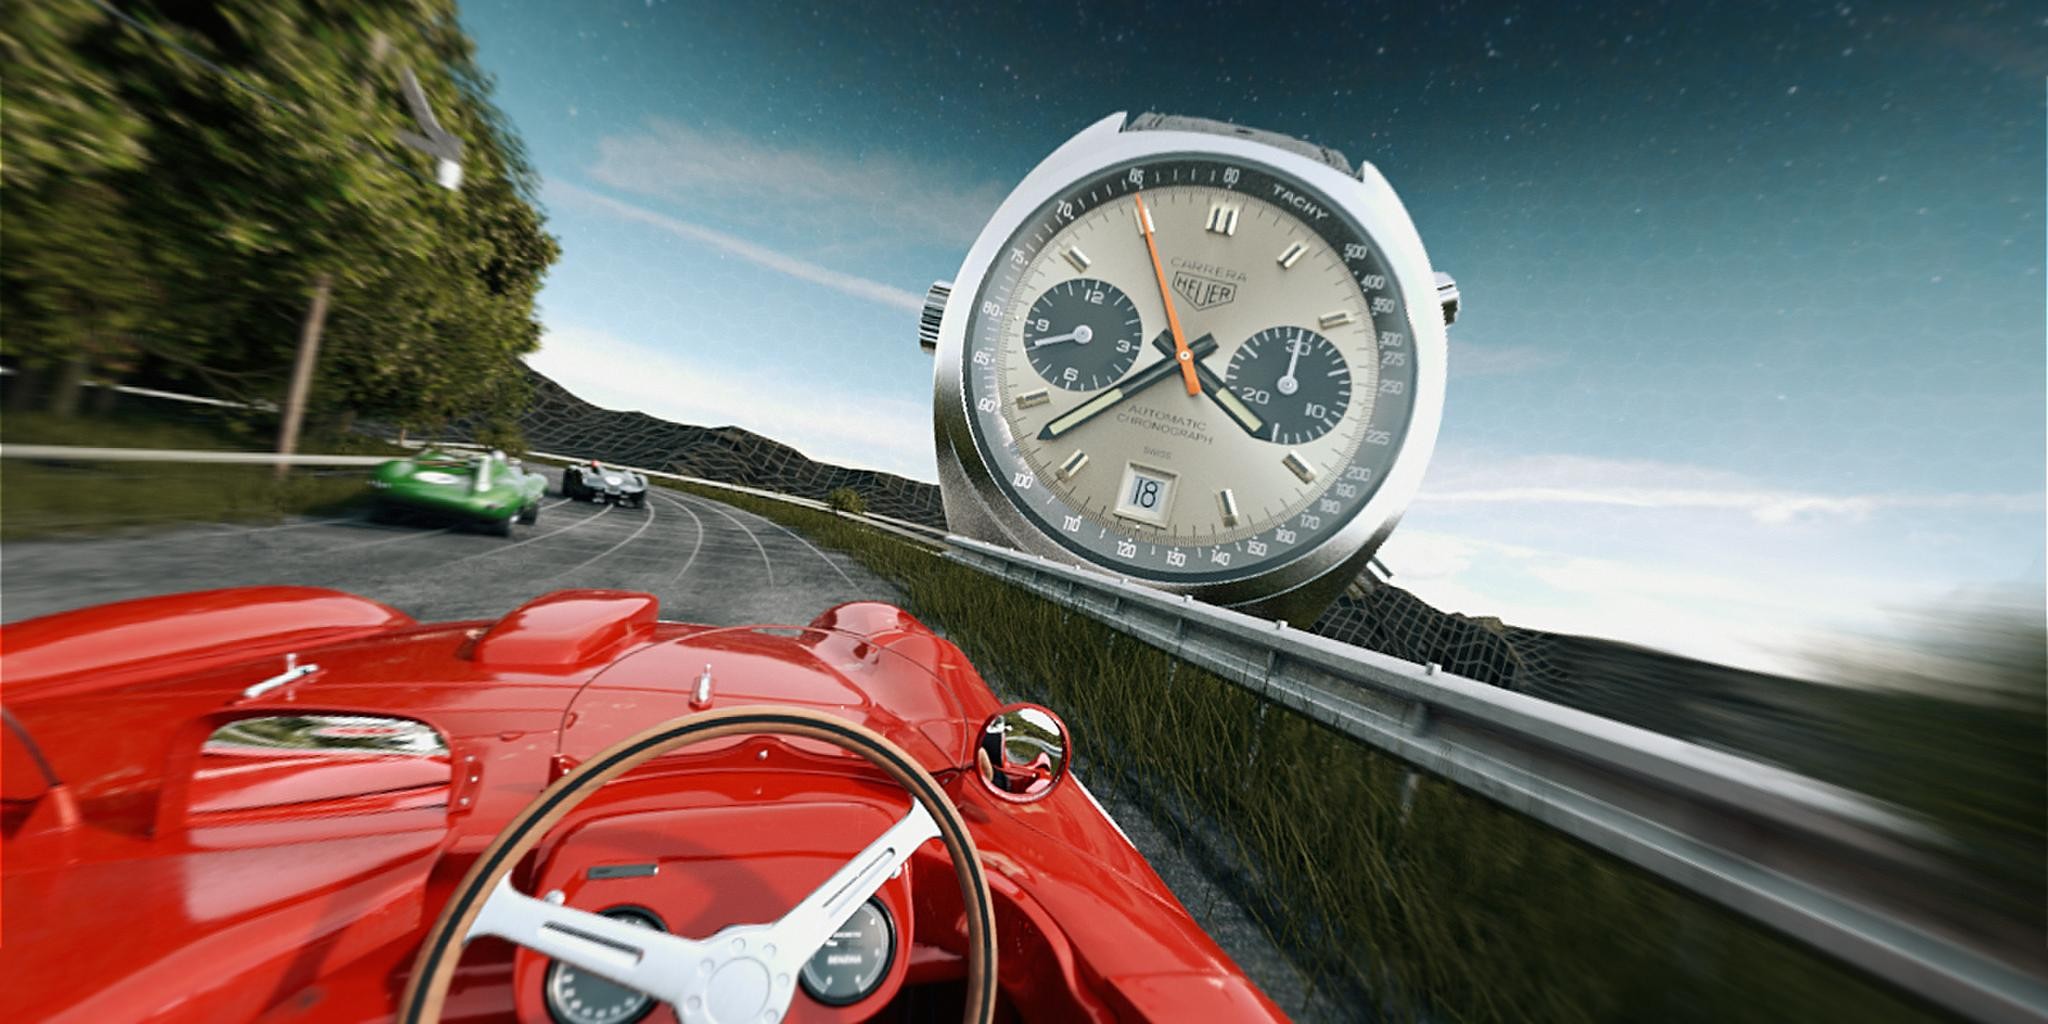 TAG HEUER VIRTUAL REALITY PROJECT